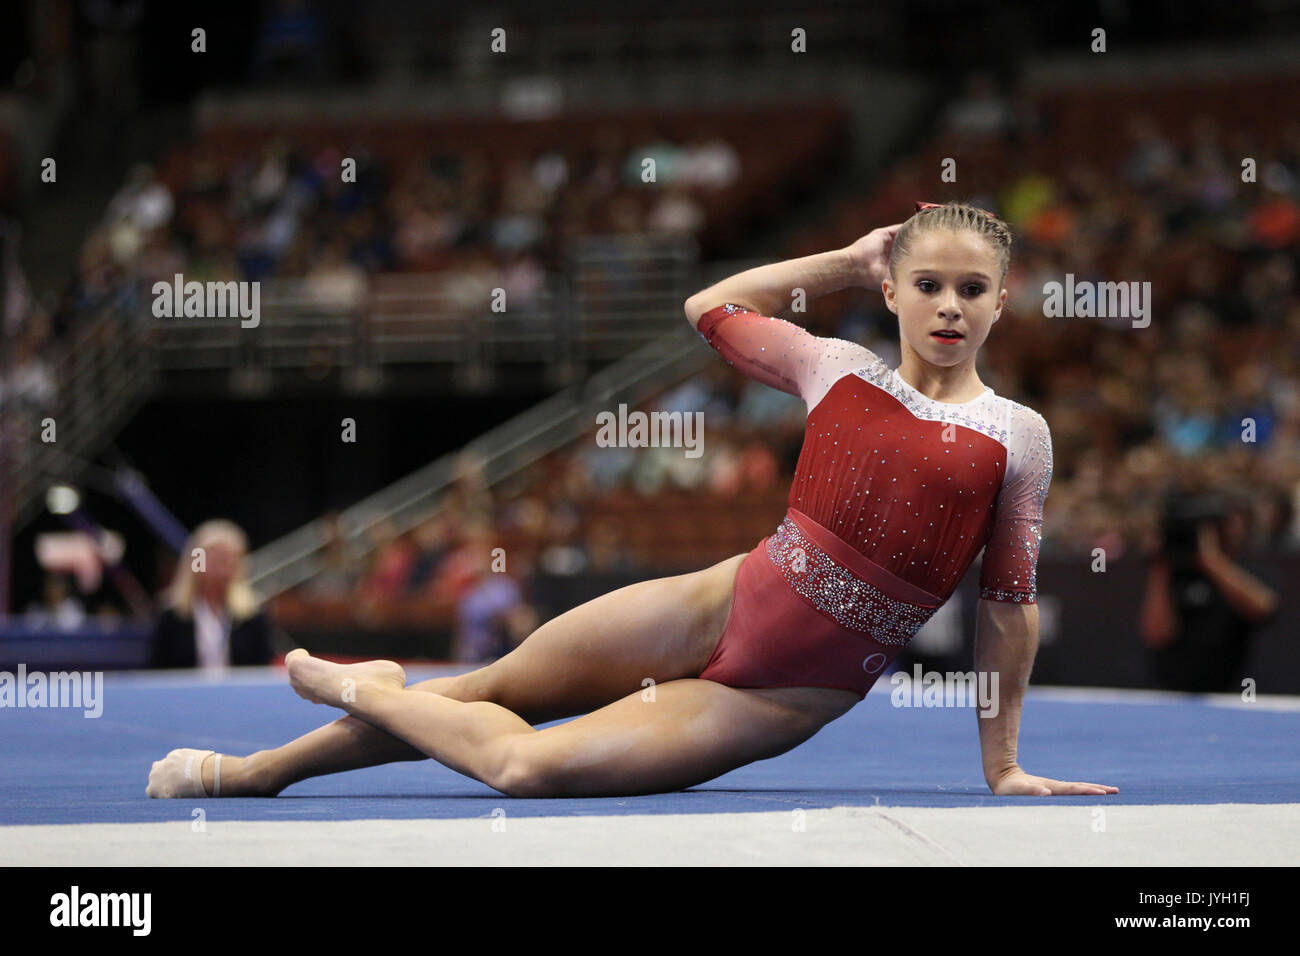 August 18, 2017: Gymnast Ragan Smith competes on the first day of the ...